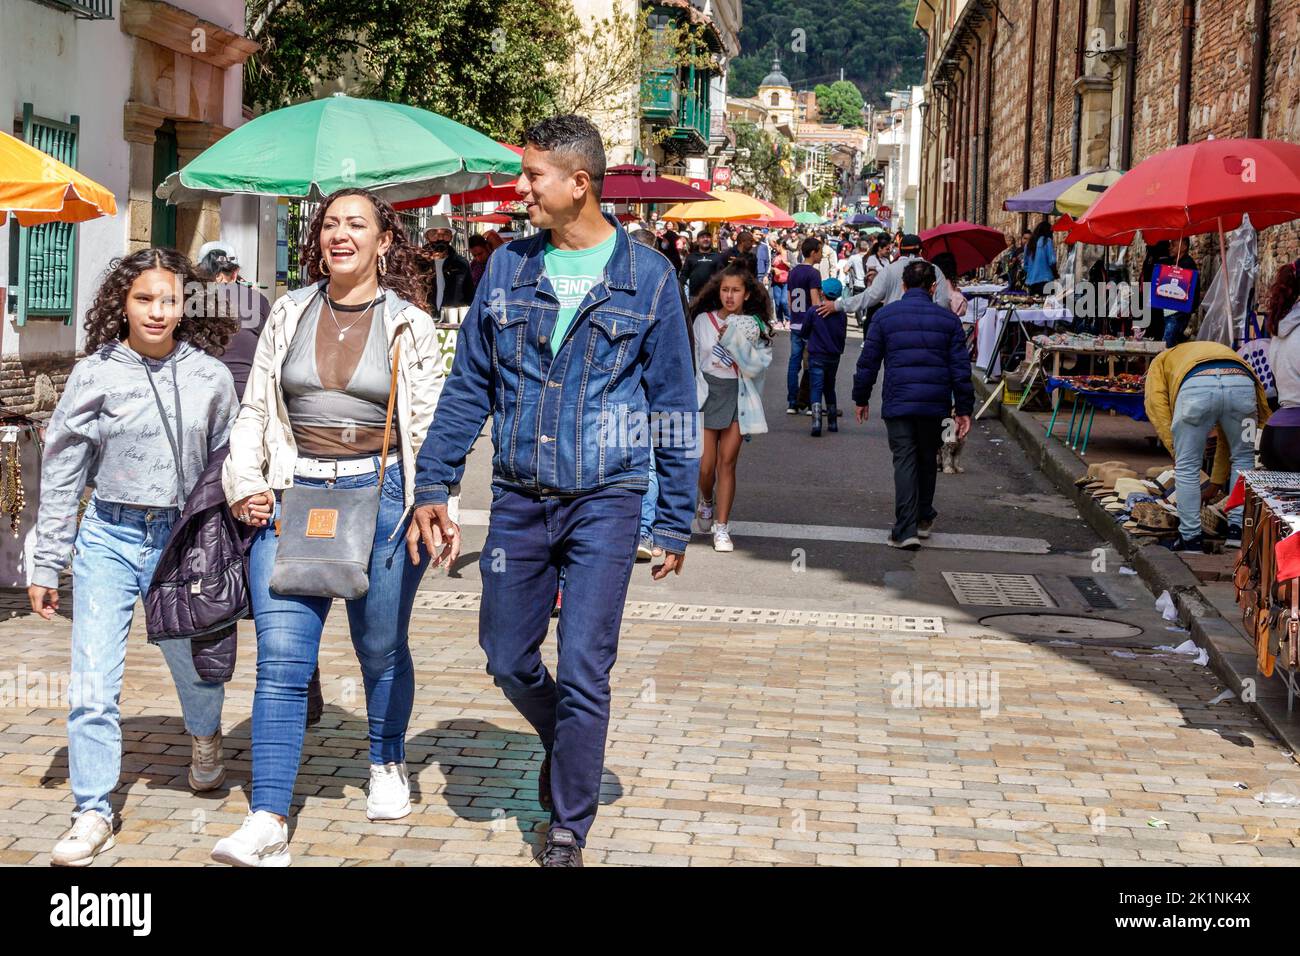 Bogota Colombia,La Candelaria Centro Historico central historic old city center centre Calle 11,busy street pedestrians family holding hands walking f Stock Photo